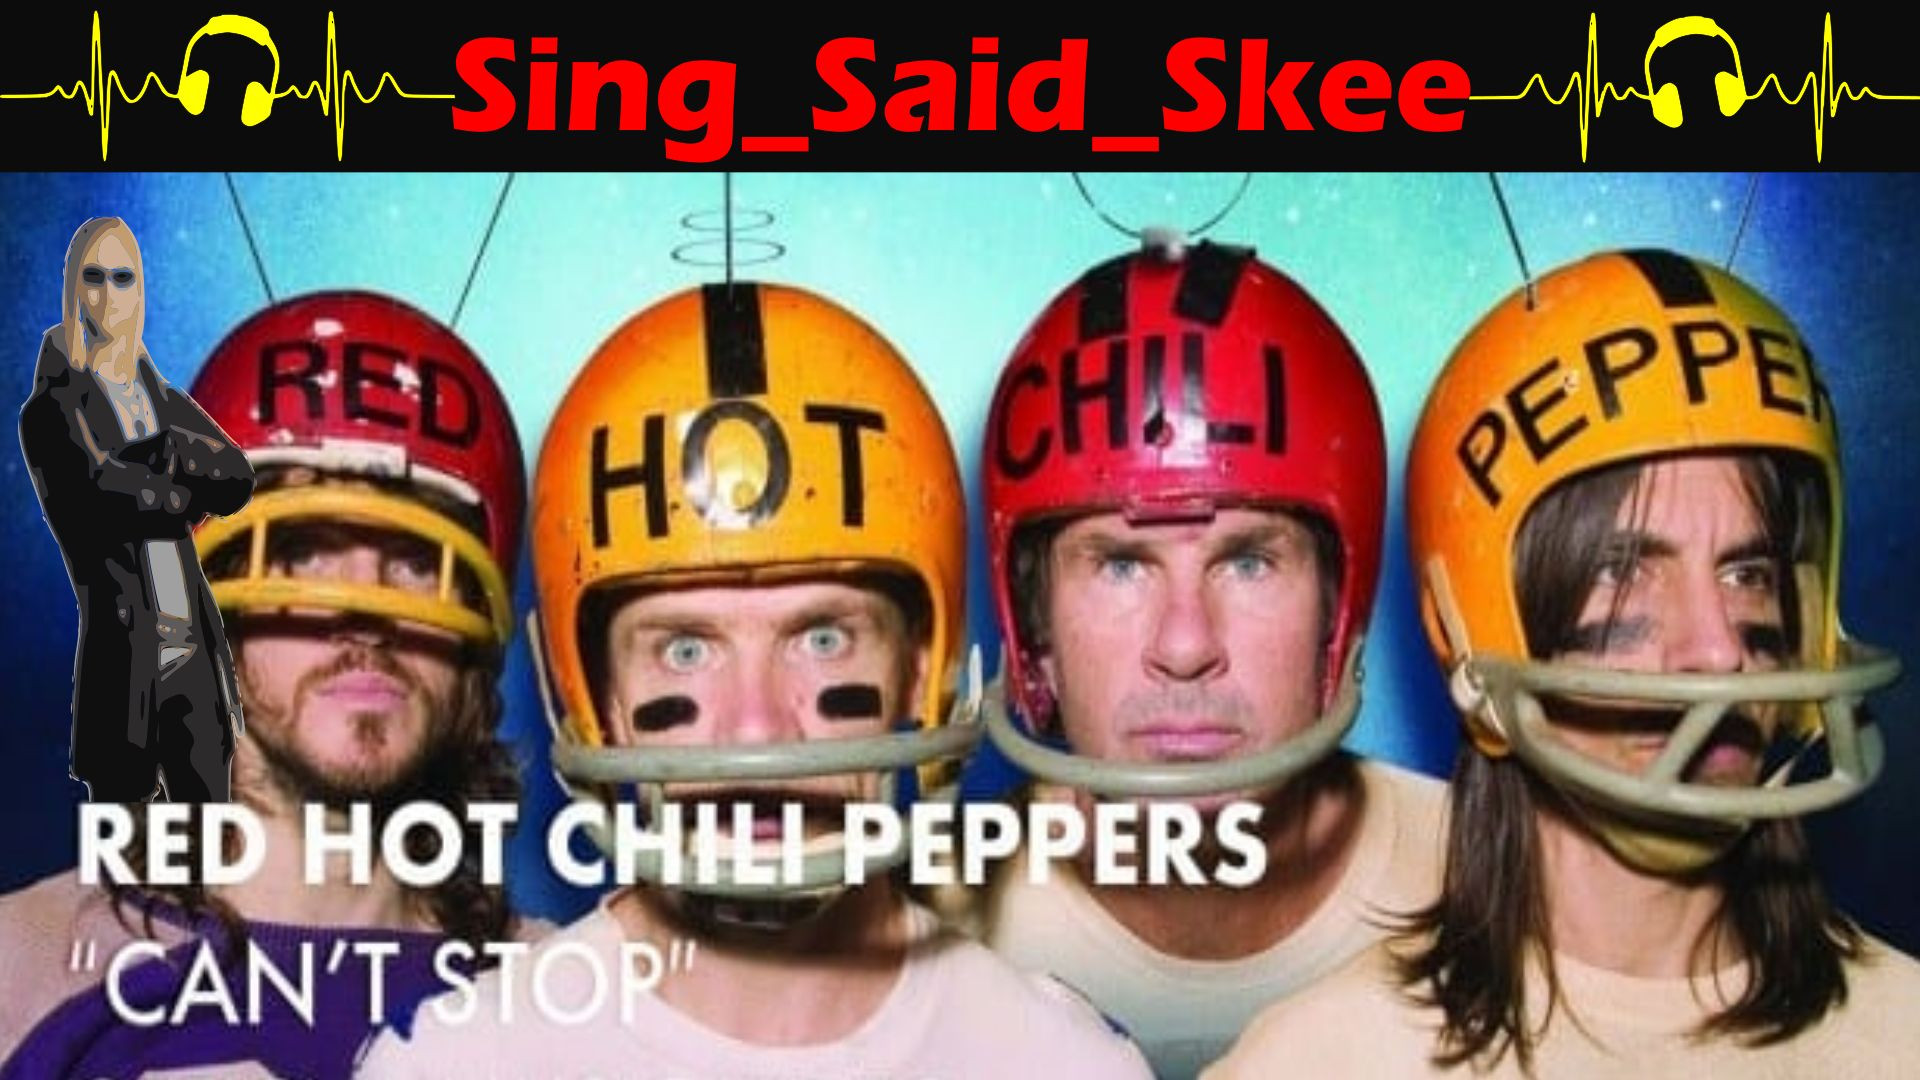 Can't Stop - Red Hot Chilli Peppers - Sing_Said_Skee